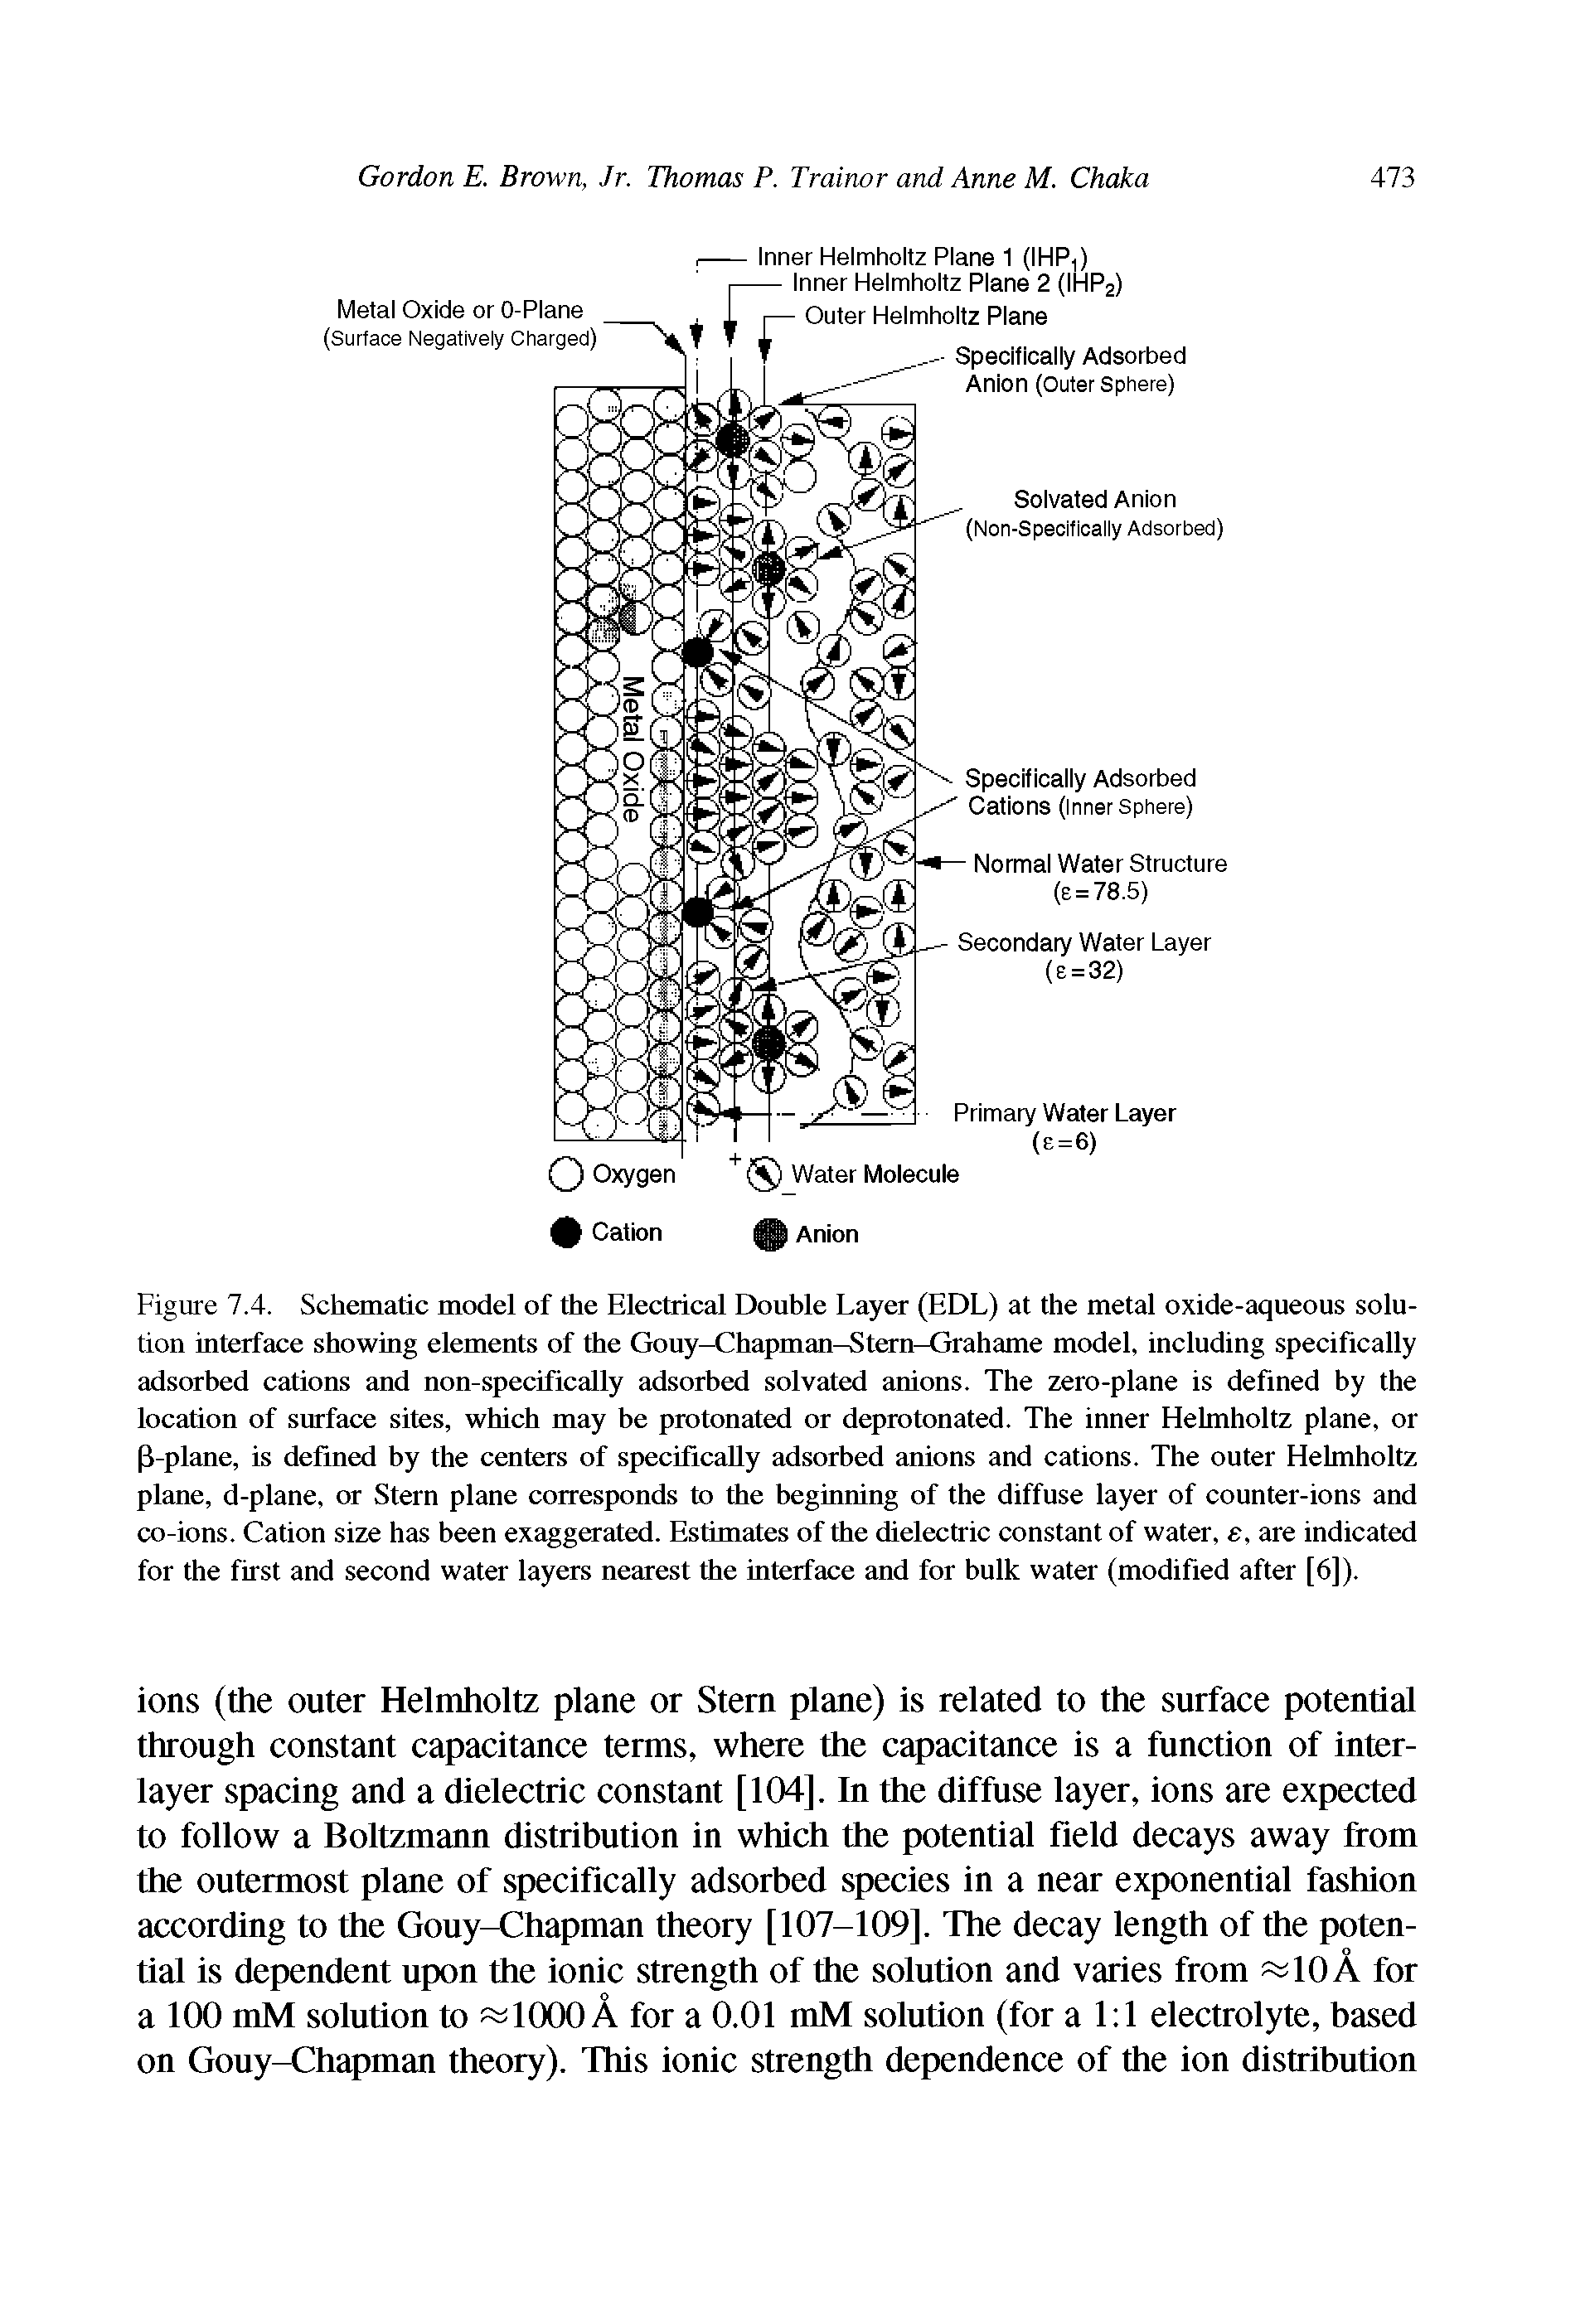 Figure 7.4. Schematic model of the Electrical Double Layer (EDL) at the metal oxide-aqueous solution interface showing elements of the Gouy-Chapman-Stern-Grahame model, including specifically adsorbed cations and non-specifically adsorbed solvated anions. The zero-plane is defined by the location of surface sites, which may be protonated or deprotonated. The inner Helmholtz plane, or [i-planc, is defined by the centers of specifically adsorbed anions and cations. The outer Helmholtz plane, d-plane, or Stern plane corresponds to the beginning of the diffuse layer of counter-ions and co-ions. Cation size has been exaggerated. Estimates of the dielectric constant of water, e, are indicated for the first and second water layers nearest the interface and for bulk water (modified after [6]).